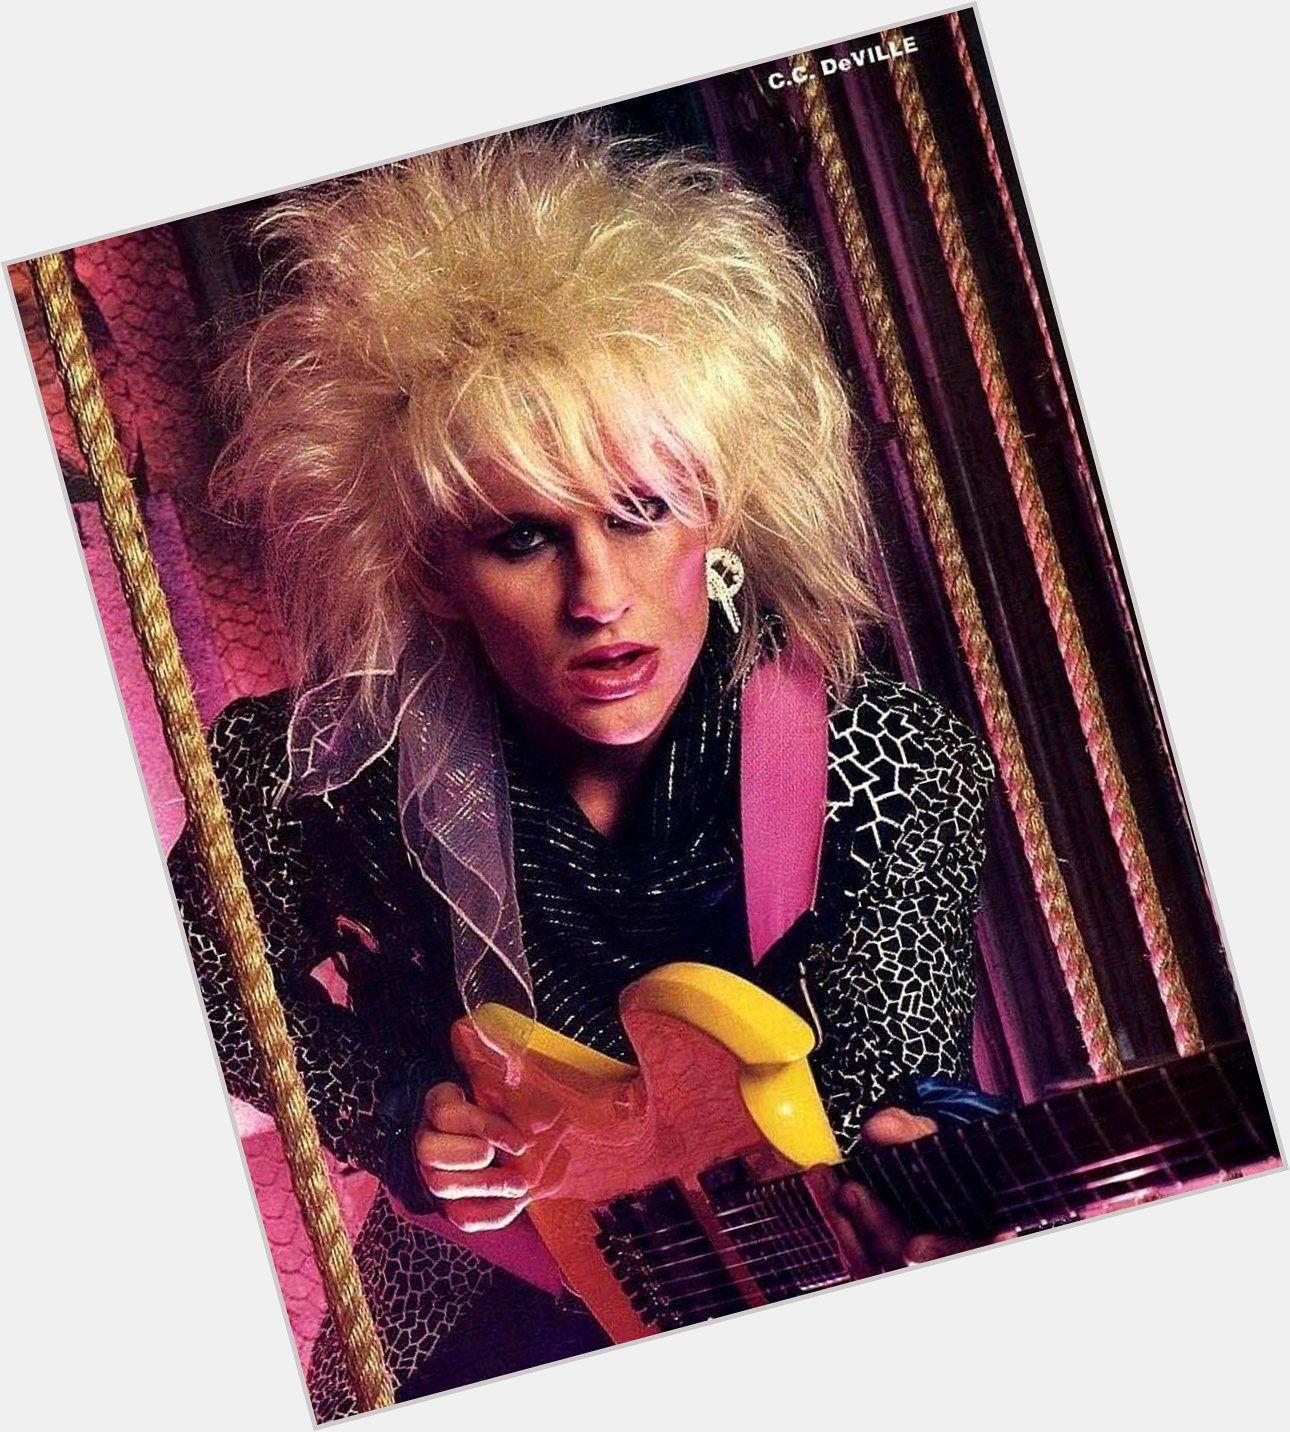 Happy birthday to American guitarist C.C. DeVille, born May 14, 1962, the lead guitarist of rock band Poison. 